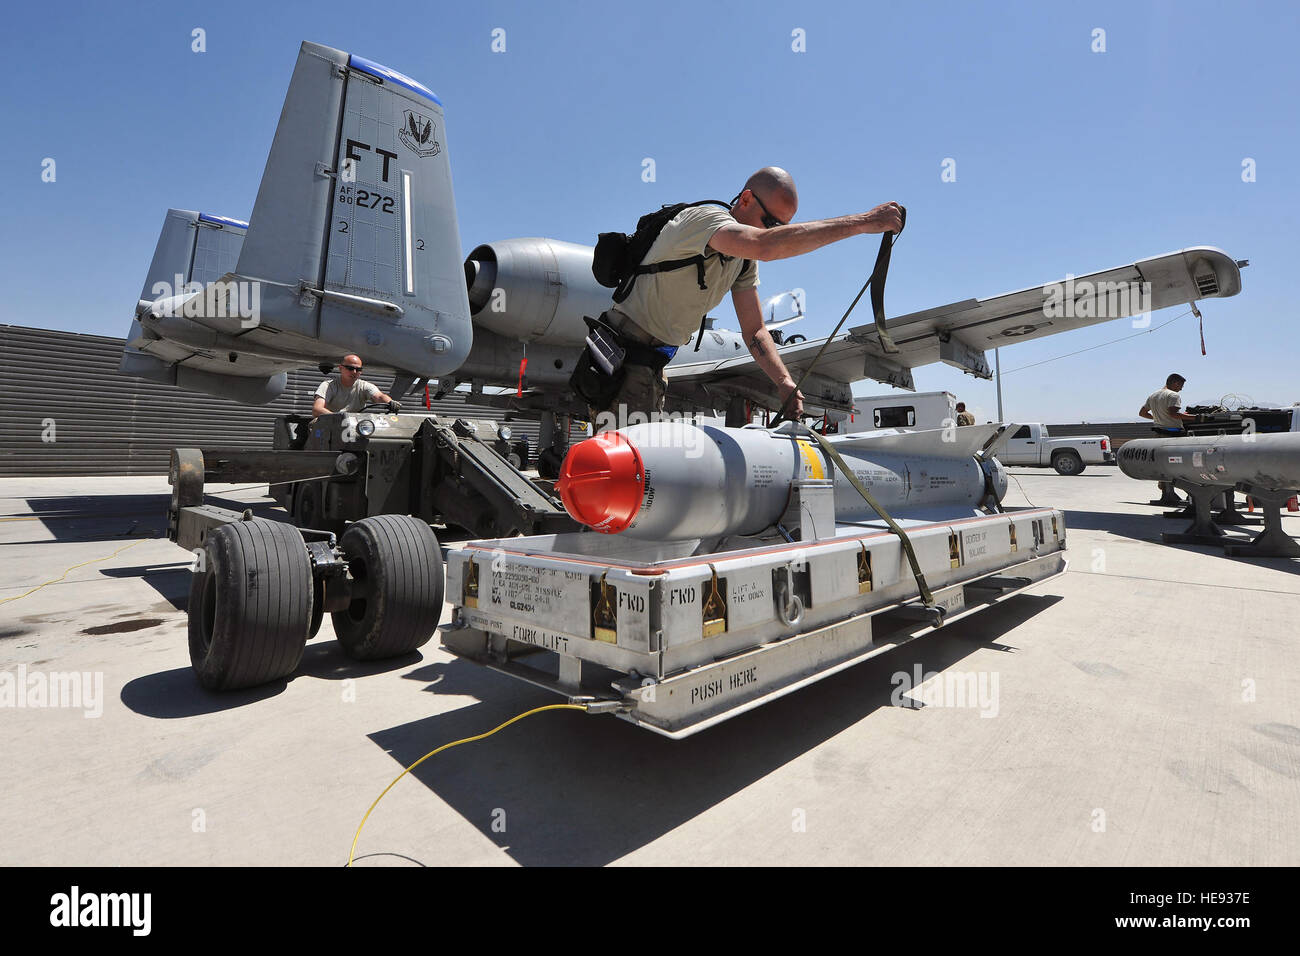 Weapon loaders from the 74th Expeditionary Fighter Squadron prepare to load ammunition onto an A-10 Thunderbolt II on Bagram Air Field, Afghanistan, May 8, 2013. The aircraft can deploy general purpose bombs, cluster bomb units, laser guided bombs, joint direct attack munitions, wind corrected munitions dispenser, AGM-65 Maverick and AIM-9 Sidewinder missiles, rockets, illumination flares, and the GAU-8/A 30mm cannon, capable of firing 3,900 rounds per minute.  Senior Airman Chris Willis) Stock Photo